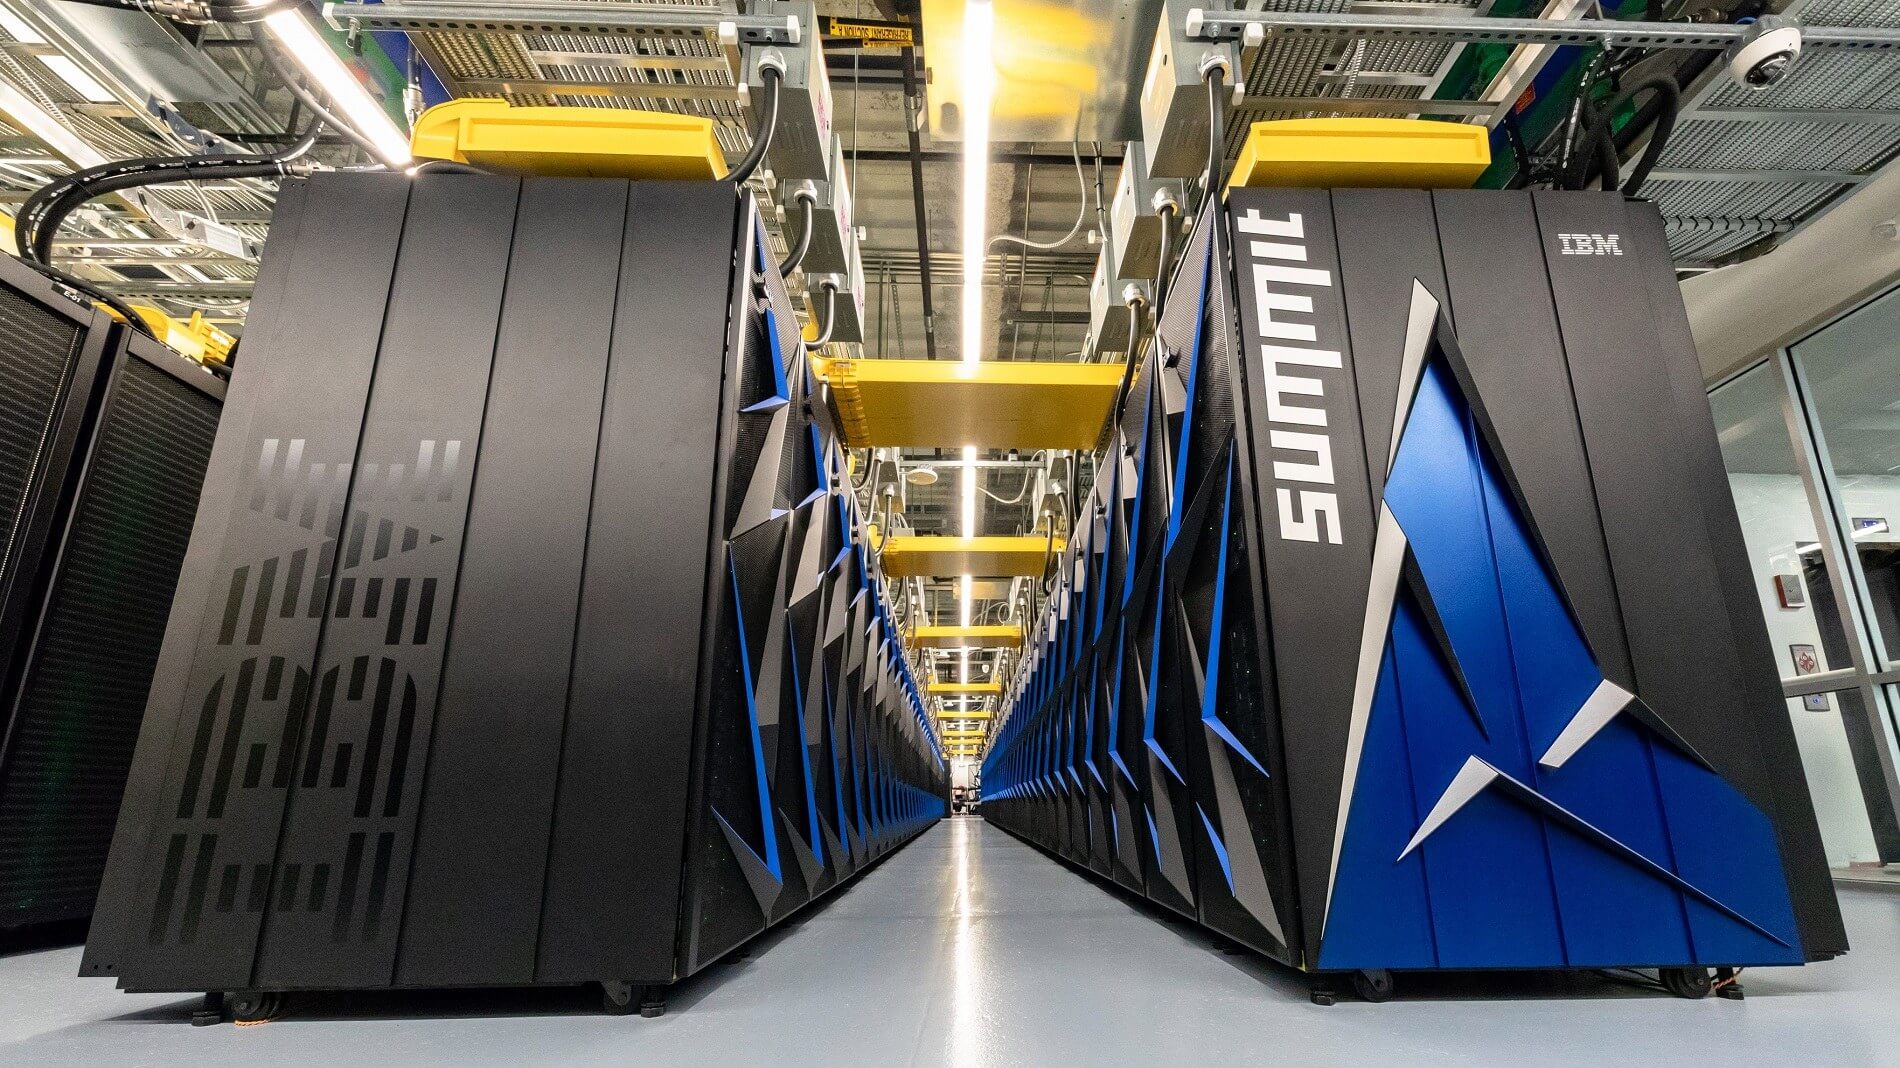 The US tops world's fastest supercomputers list, but China has more systems